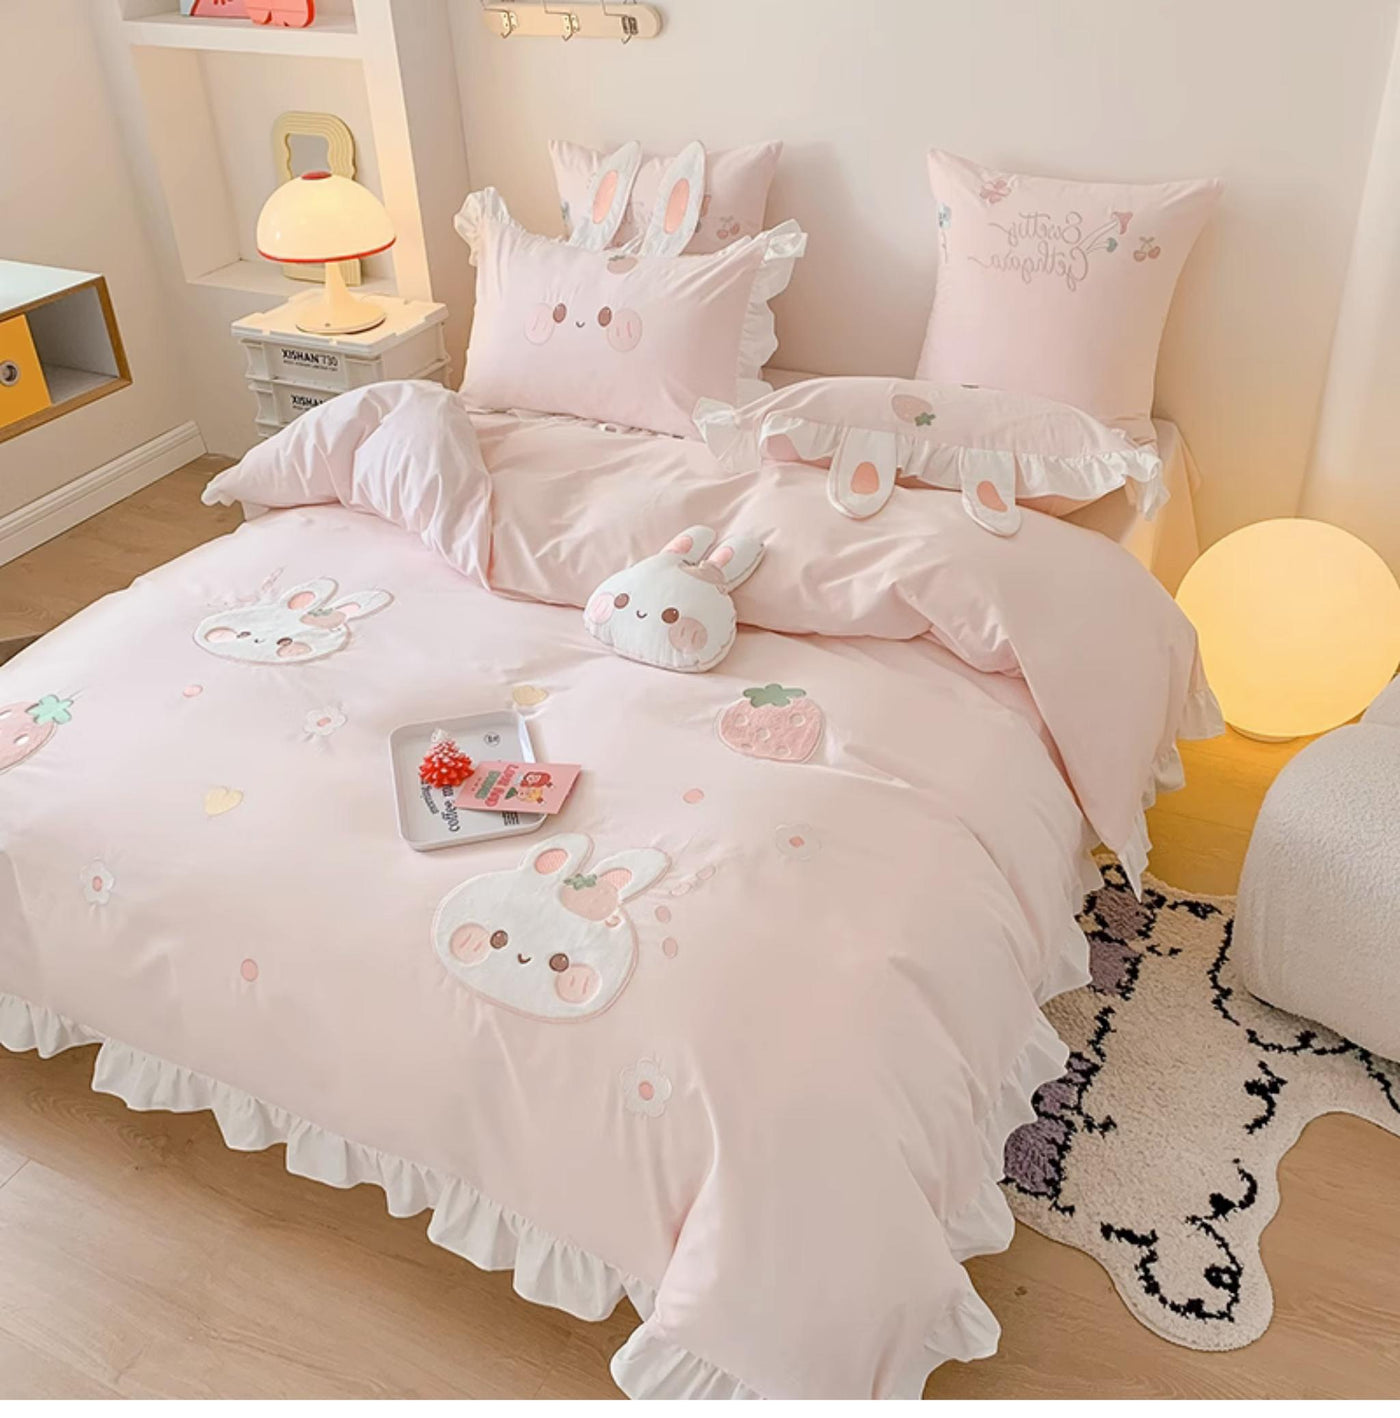 MiLL~Kawaii Lolita Rabbit Print Bedding Lolita Bedroom Set Bed linen Brushed cotton (with a free cushion) 1.2m bed three-piece set (quilt cover 150*200cm)